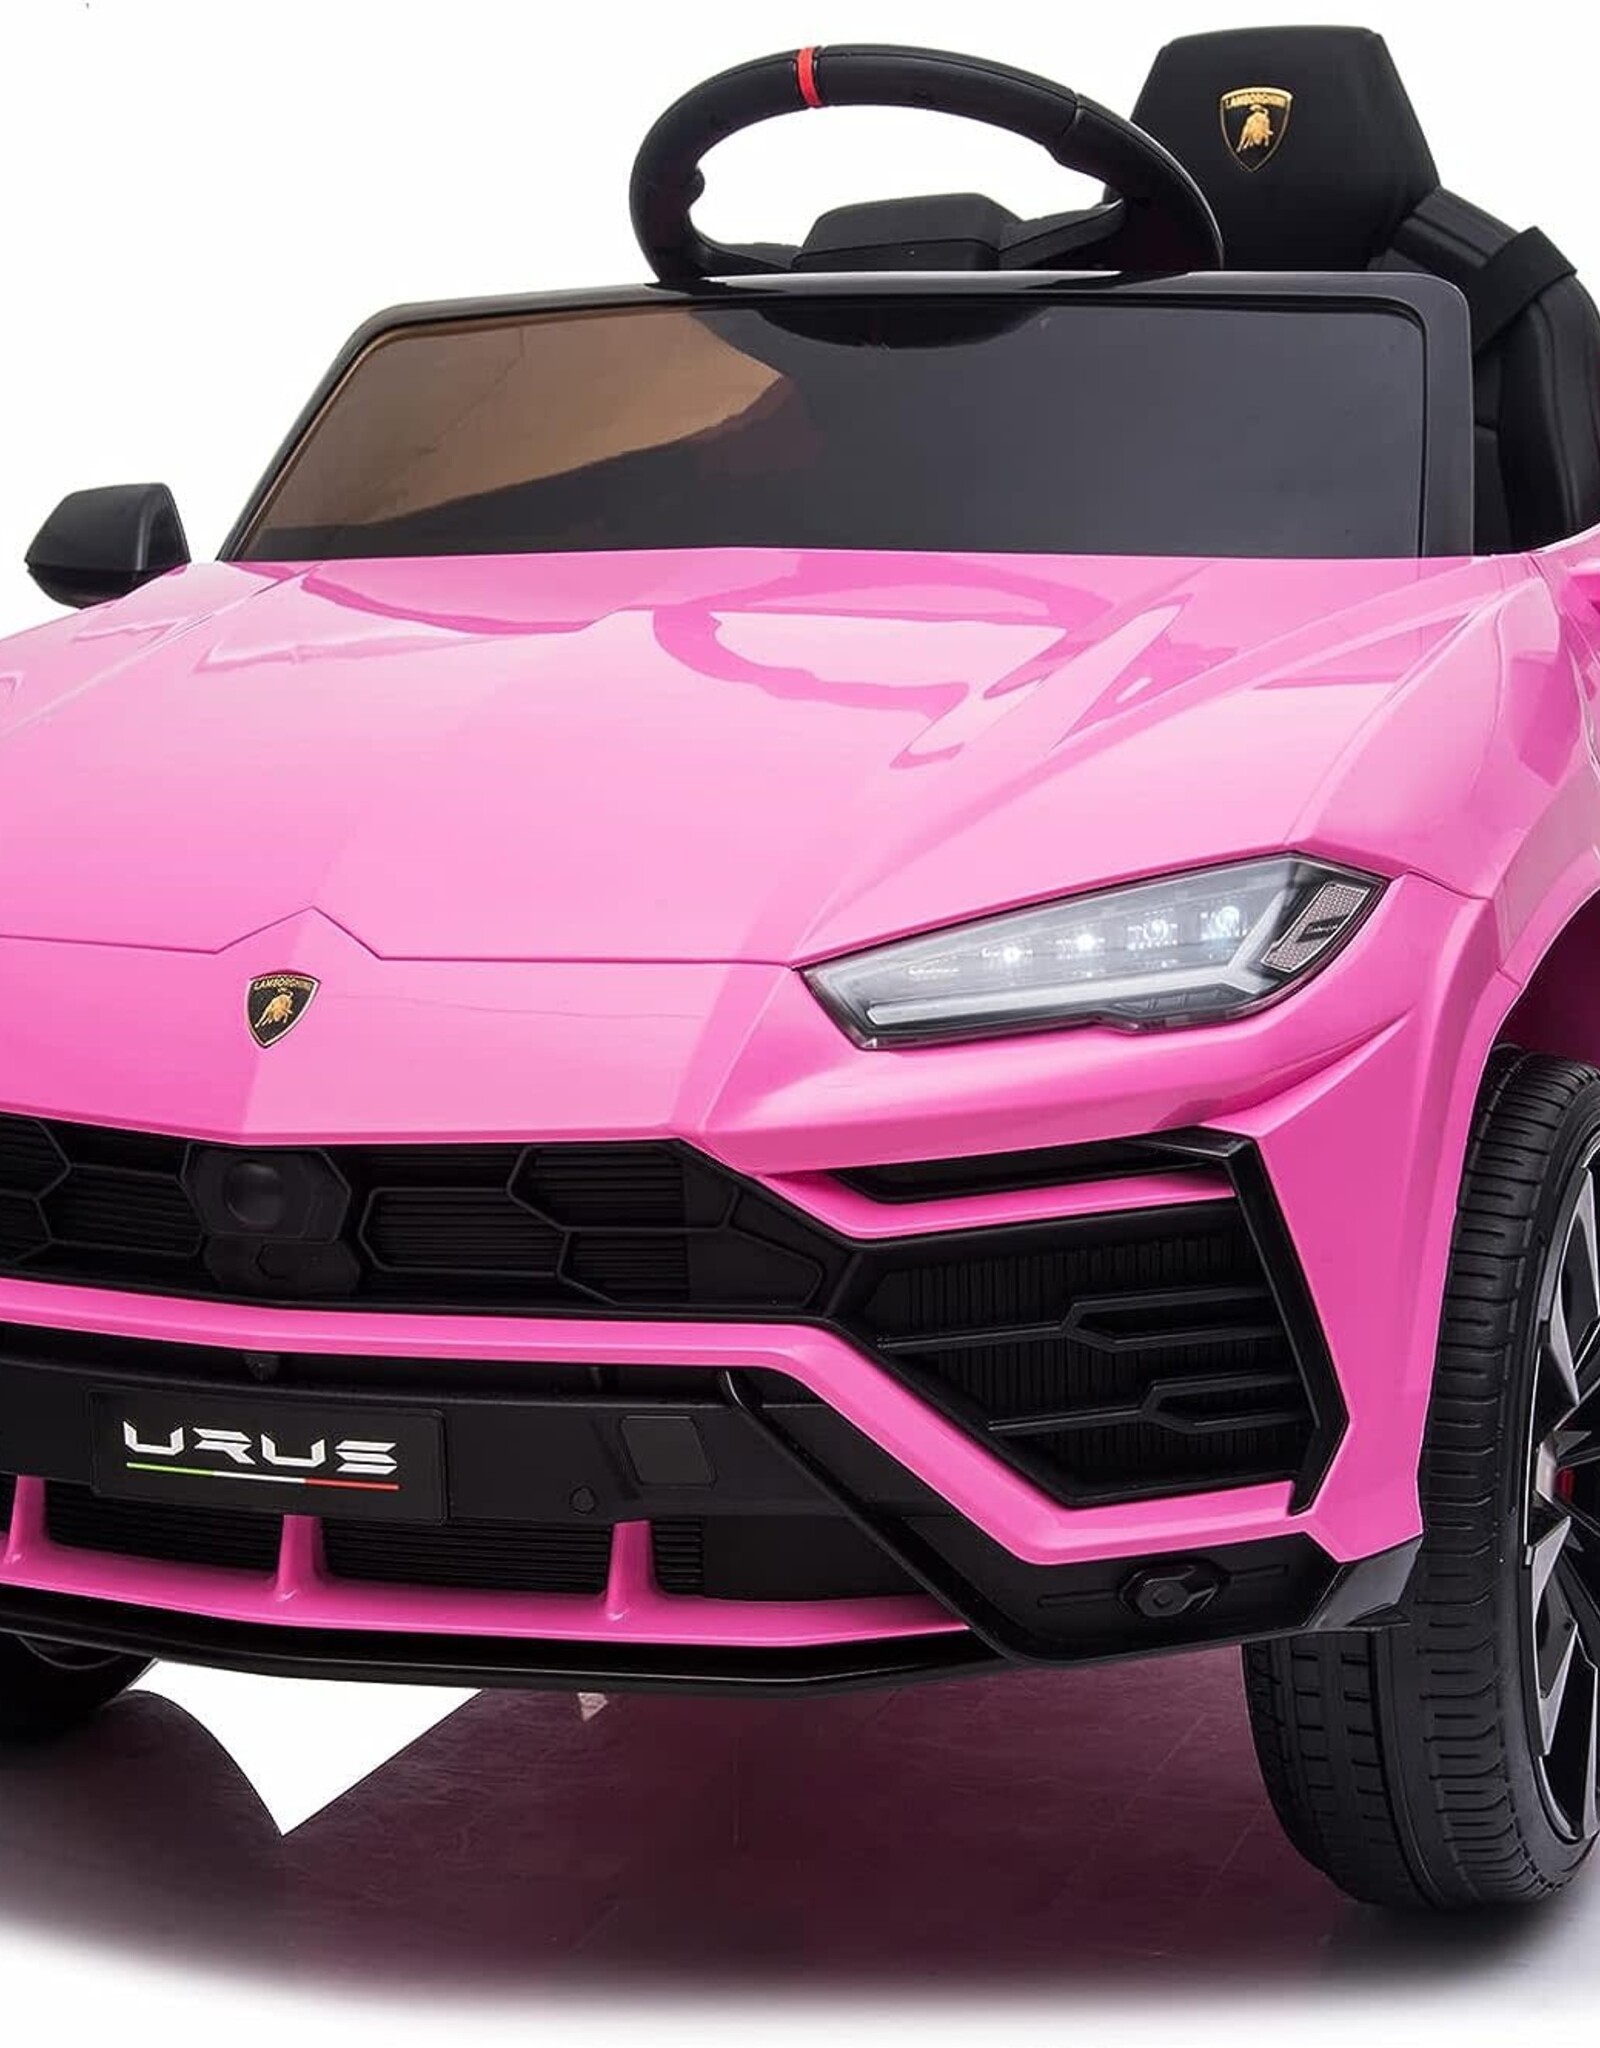 YOFE Kids Electric Ride On Car for Kids, 12V Licenced Lamborghini Kids Electric Vehicles with Remote Control, AUX, Spring Suspension, Music, LED Lights, USB Port, Foot Pedal (Pink)